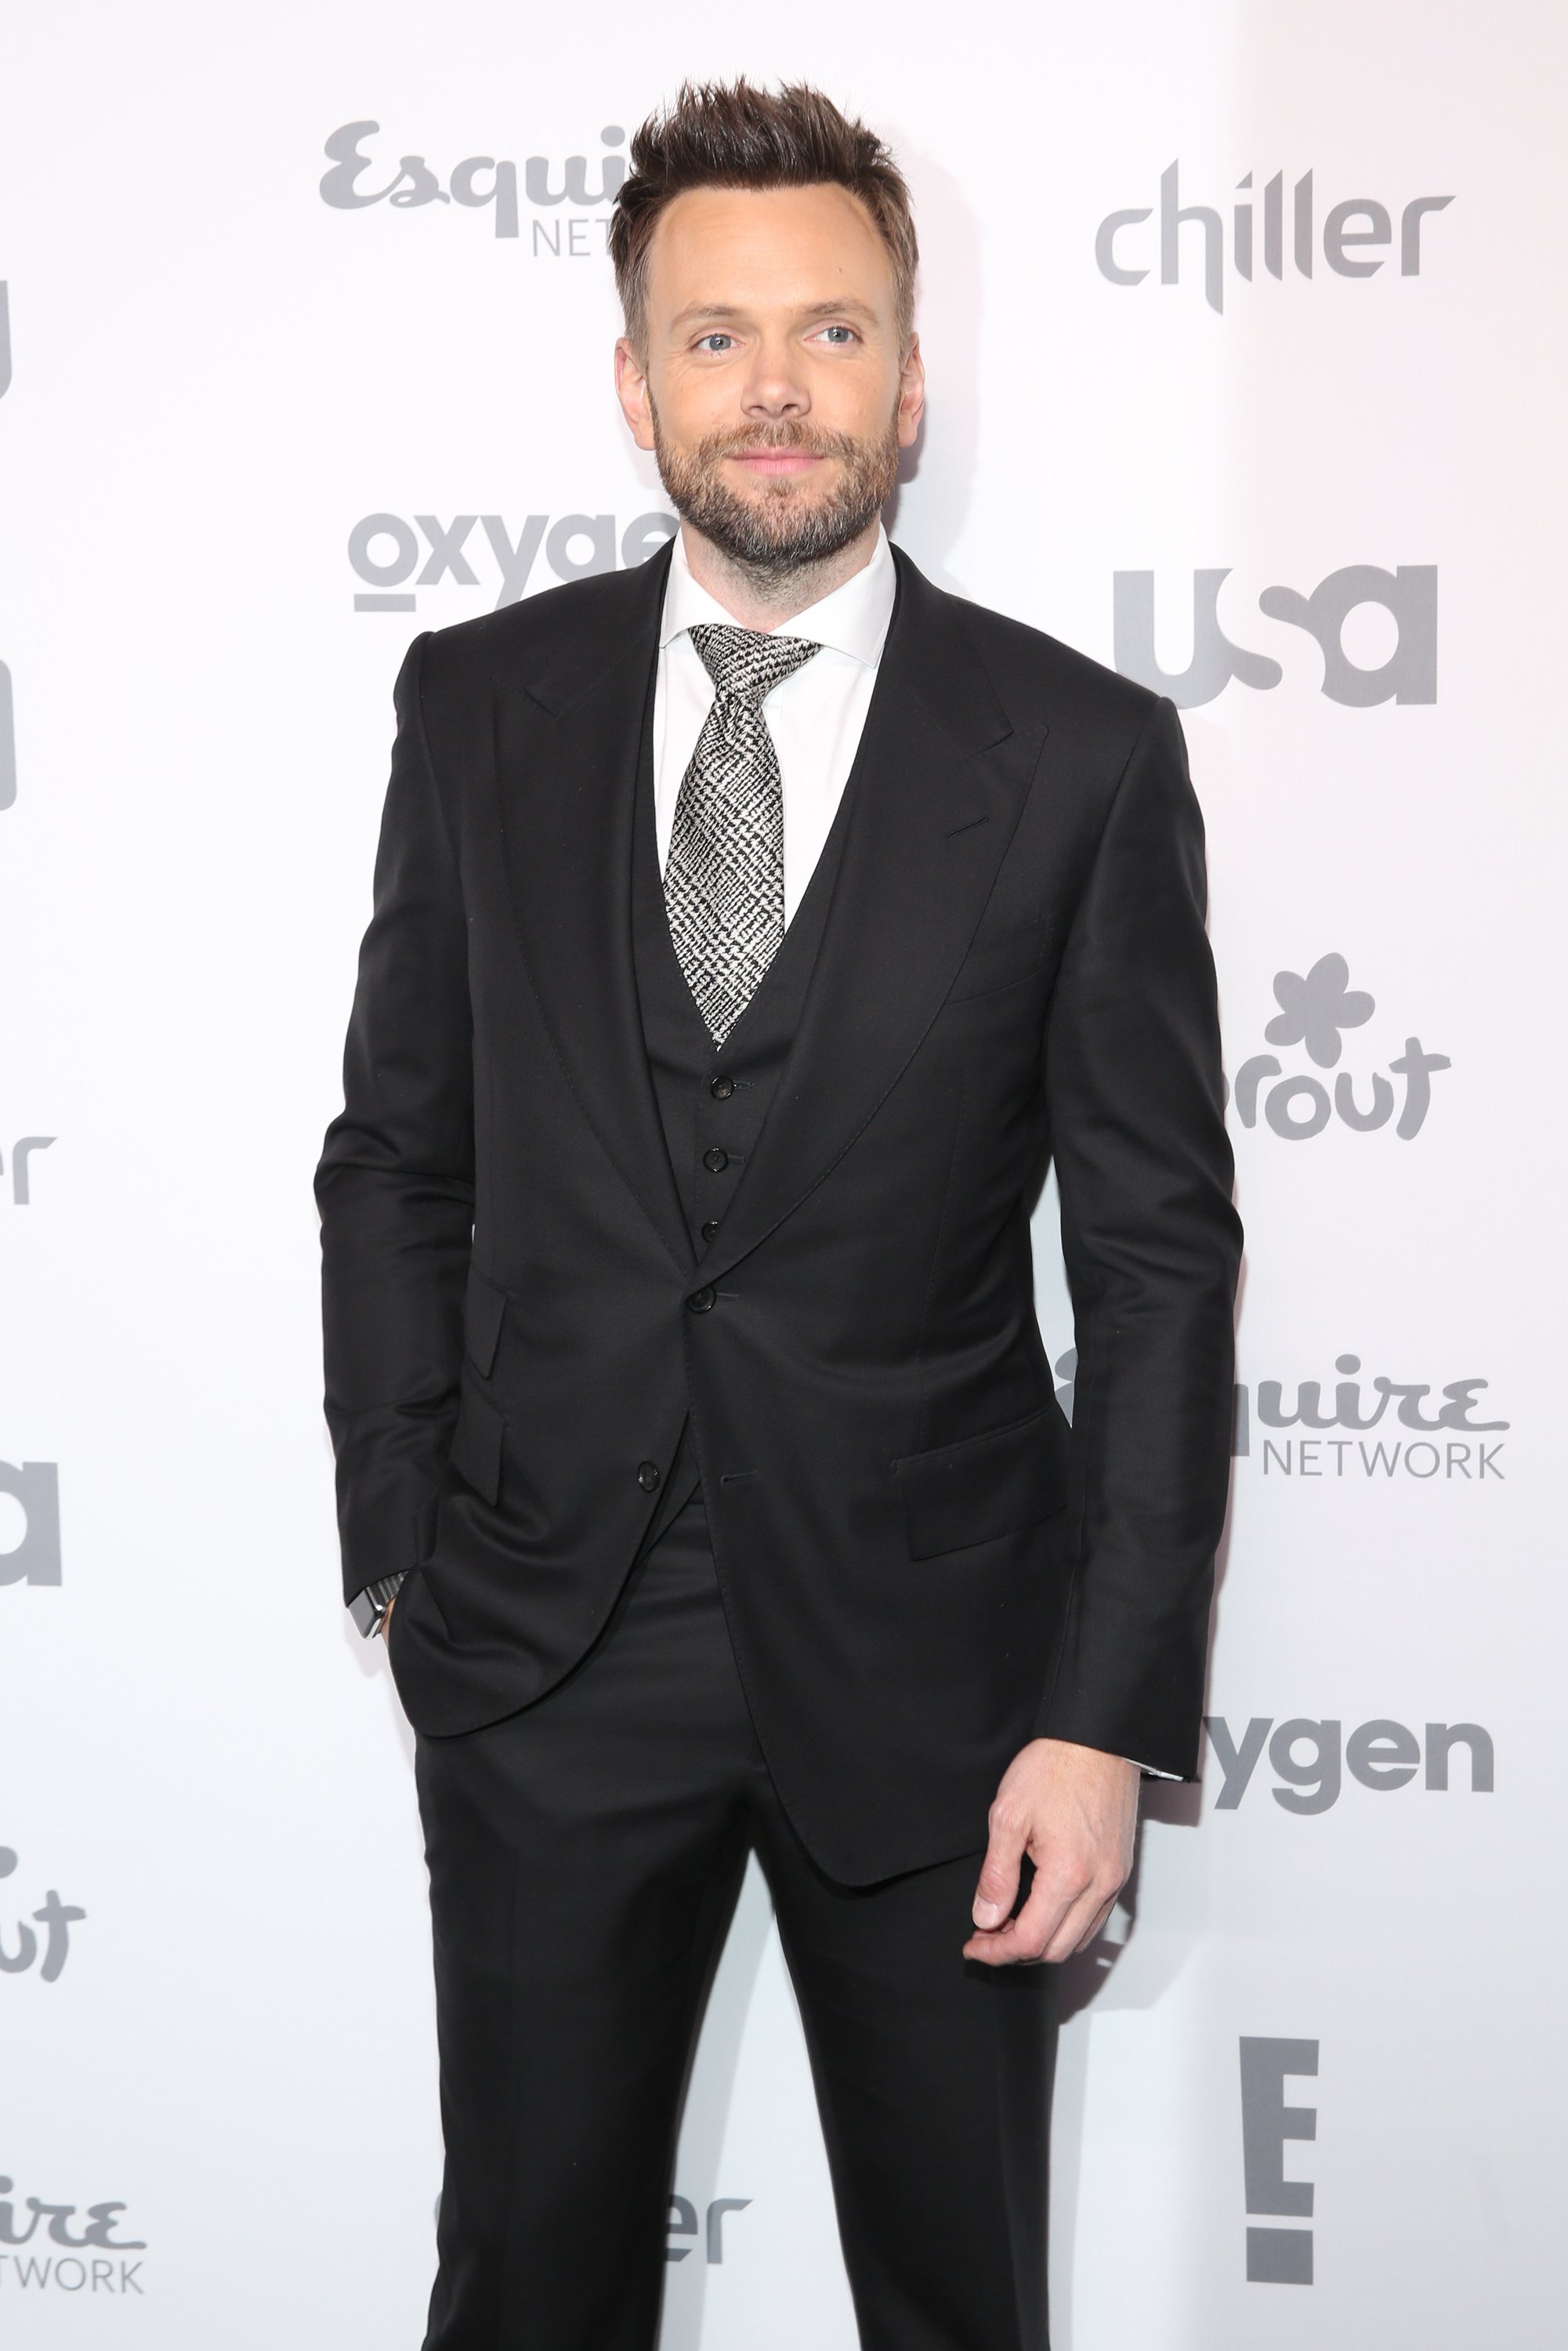 Joel McHale attends the 2015 NBCUniversal Cable Entertainment Upfront at the Javits Center in New York City on Thursday, May 14, 2015